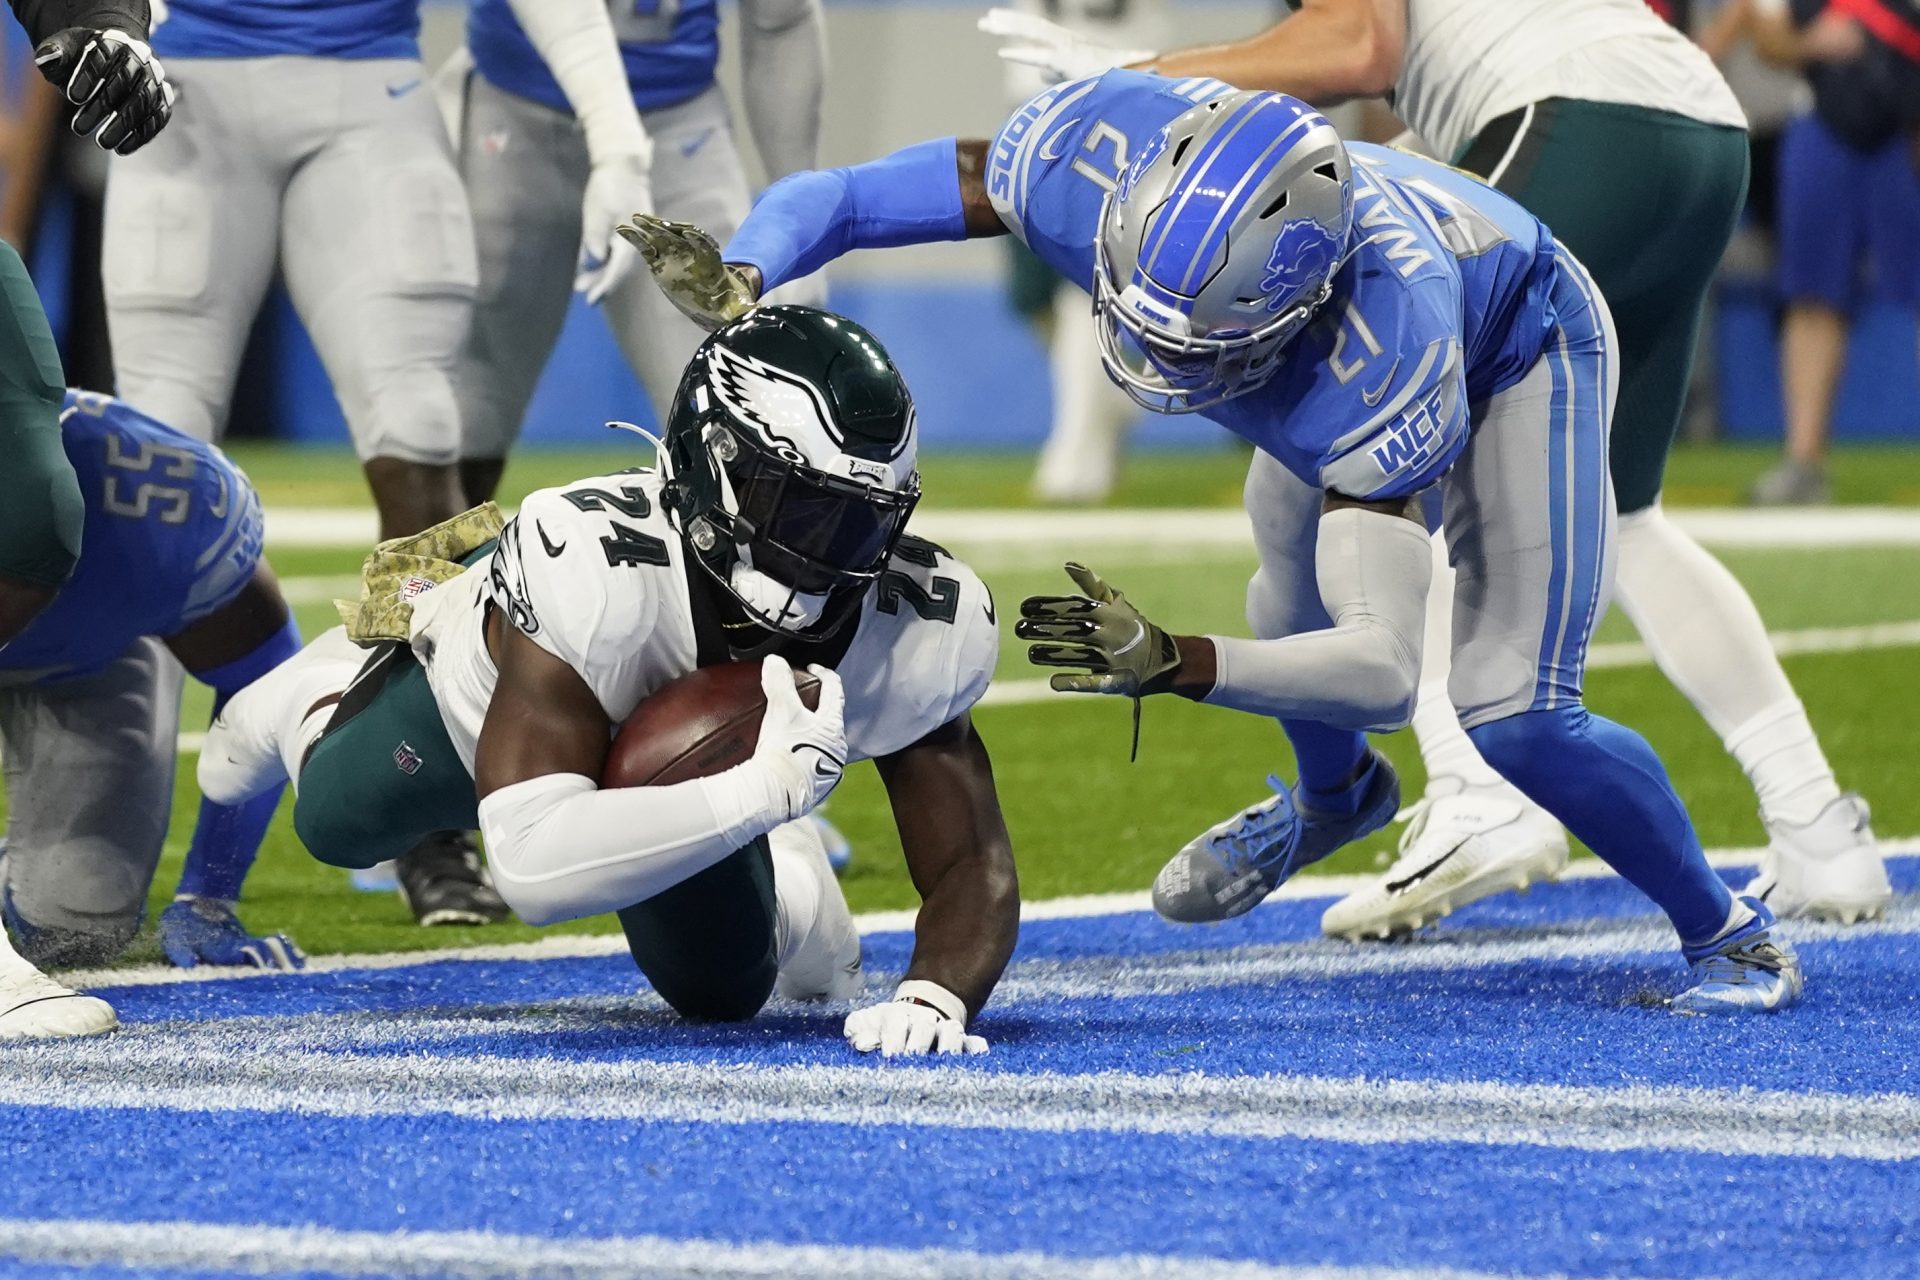 Philadelphia Eagles running back Jordan Howard (24) falls into the end zone for a 4-yard touchdown run as Detroit Lions free safety Tracy Walker III (21) defends during the first half of an NFL football game, Sunday, Oct. 31, 2021, in Detroit.